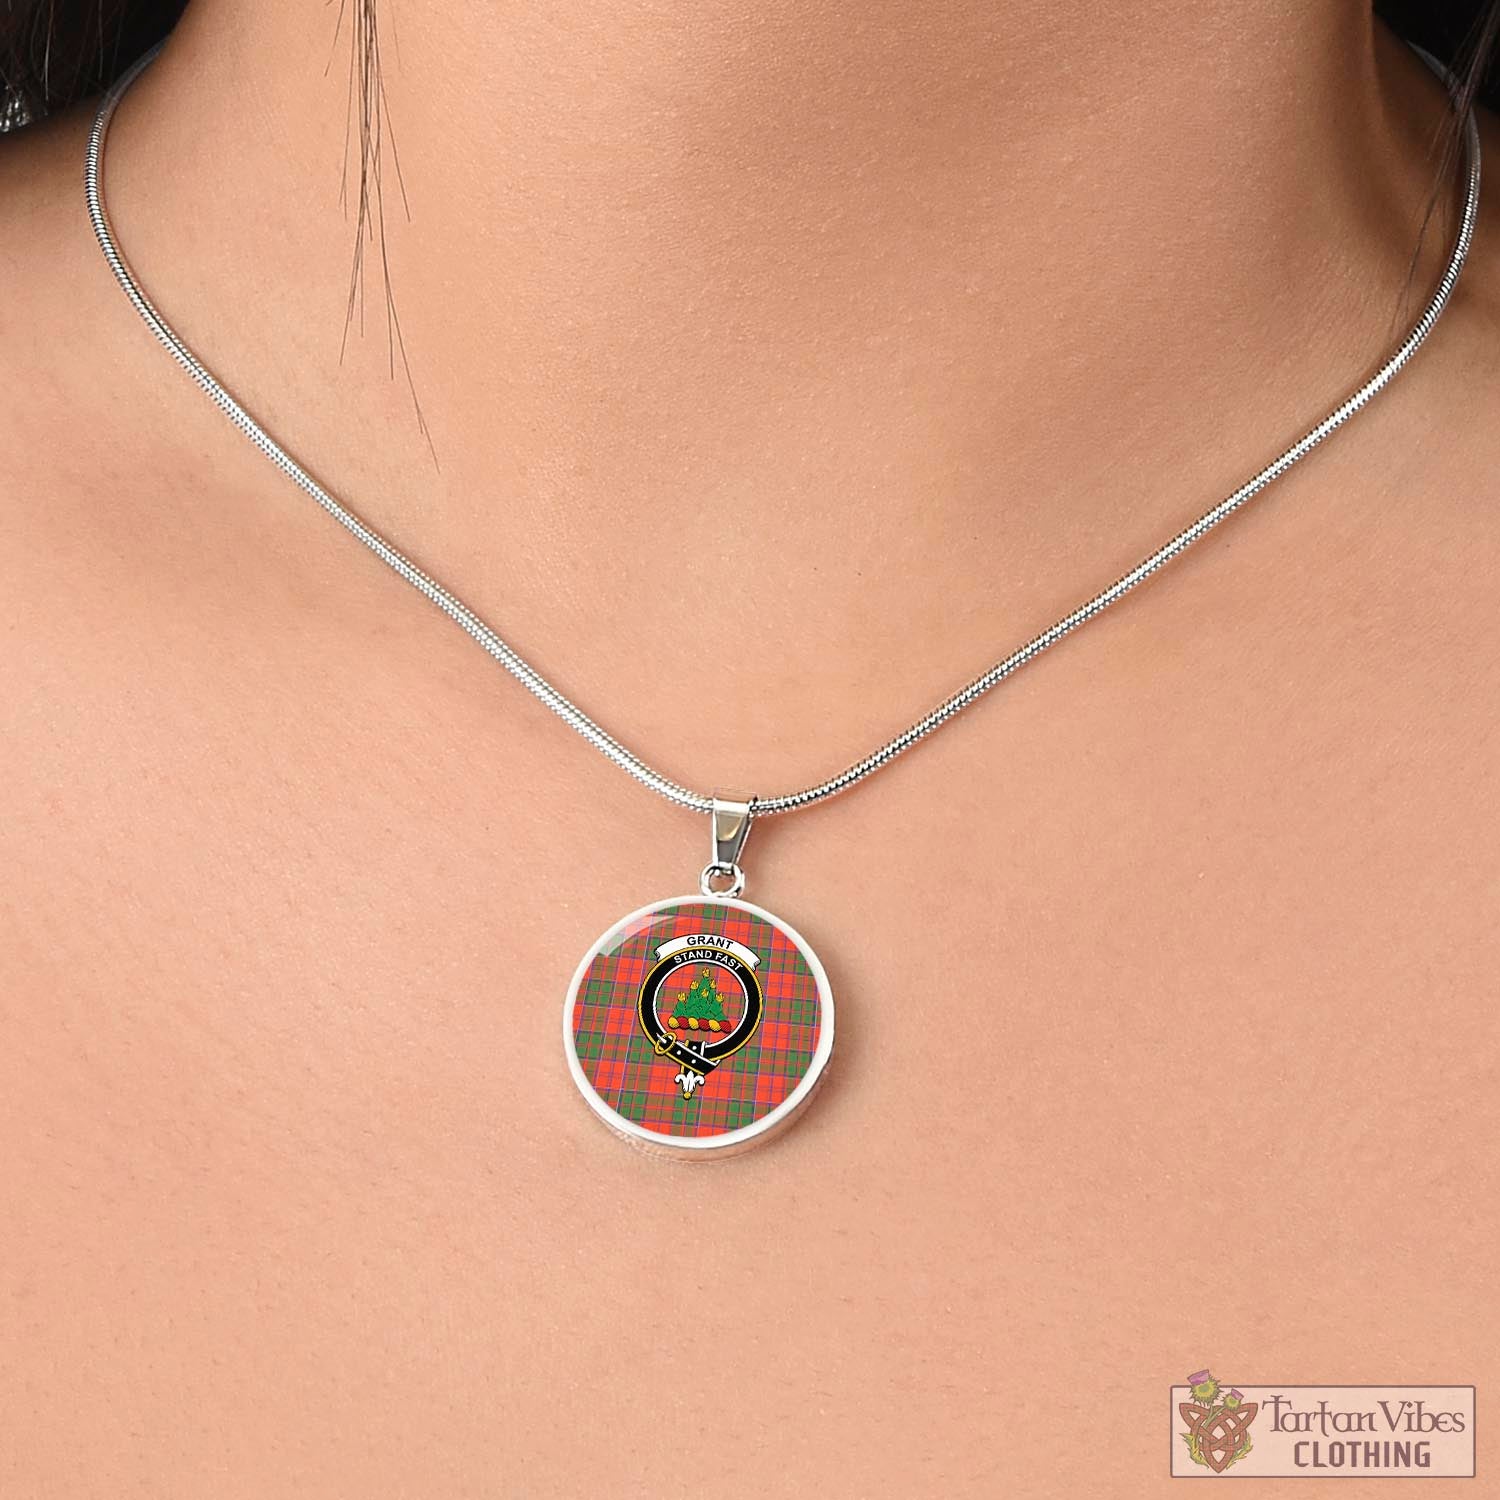 Tartan Vibes Clothing Grant Ancient Tartan Circle Necklace with Family Crest